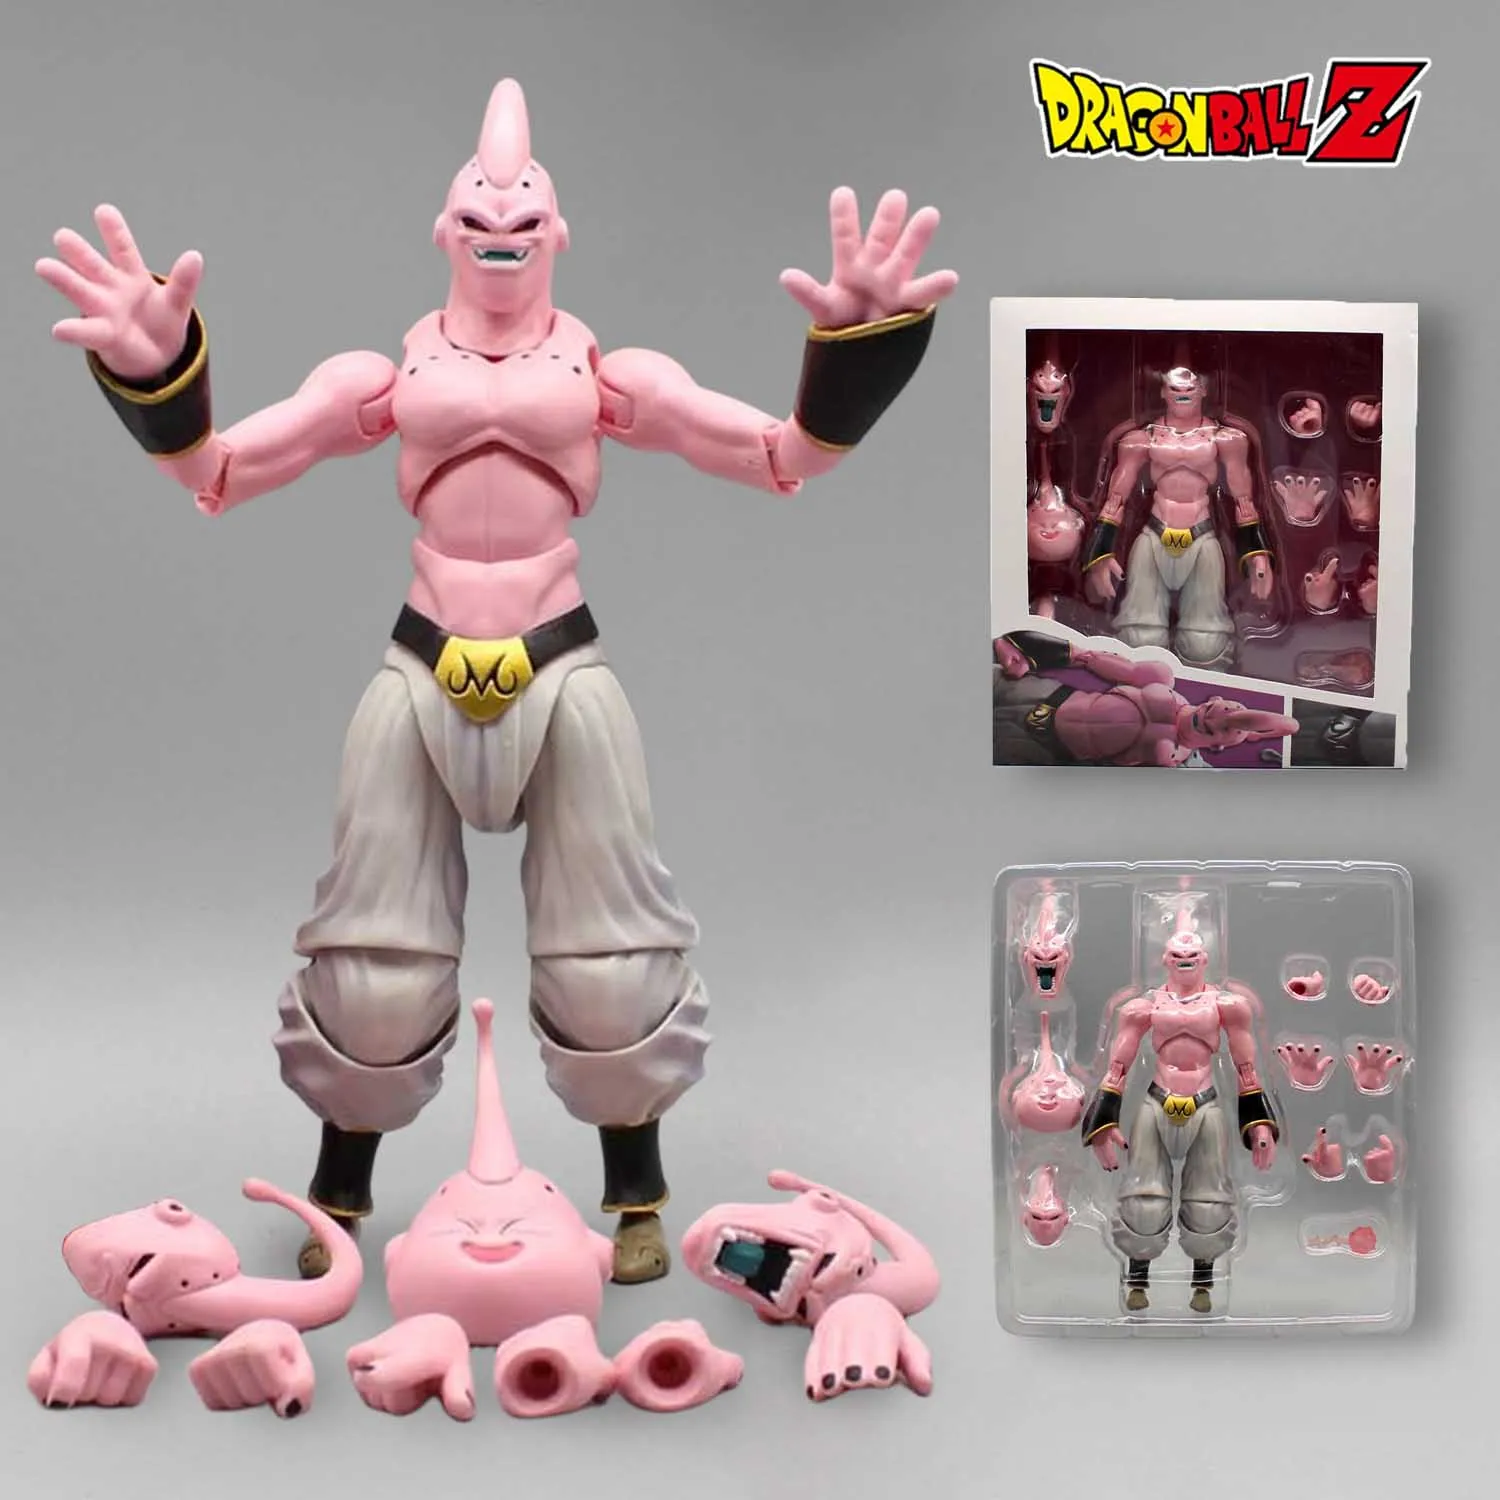 

24cm Anime Dragon Ball Sh Figuarts Majin Buu SHF Movable Super Buu Action Figure Collection Model Toys for Children Friend Gifts